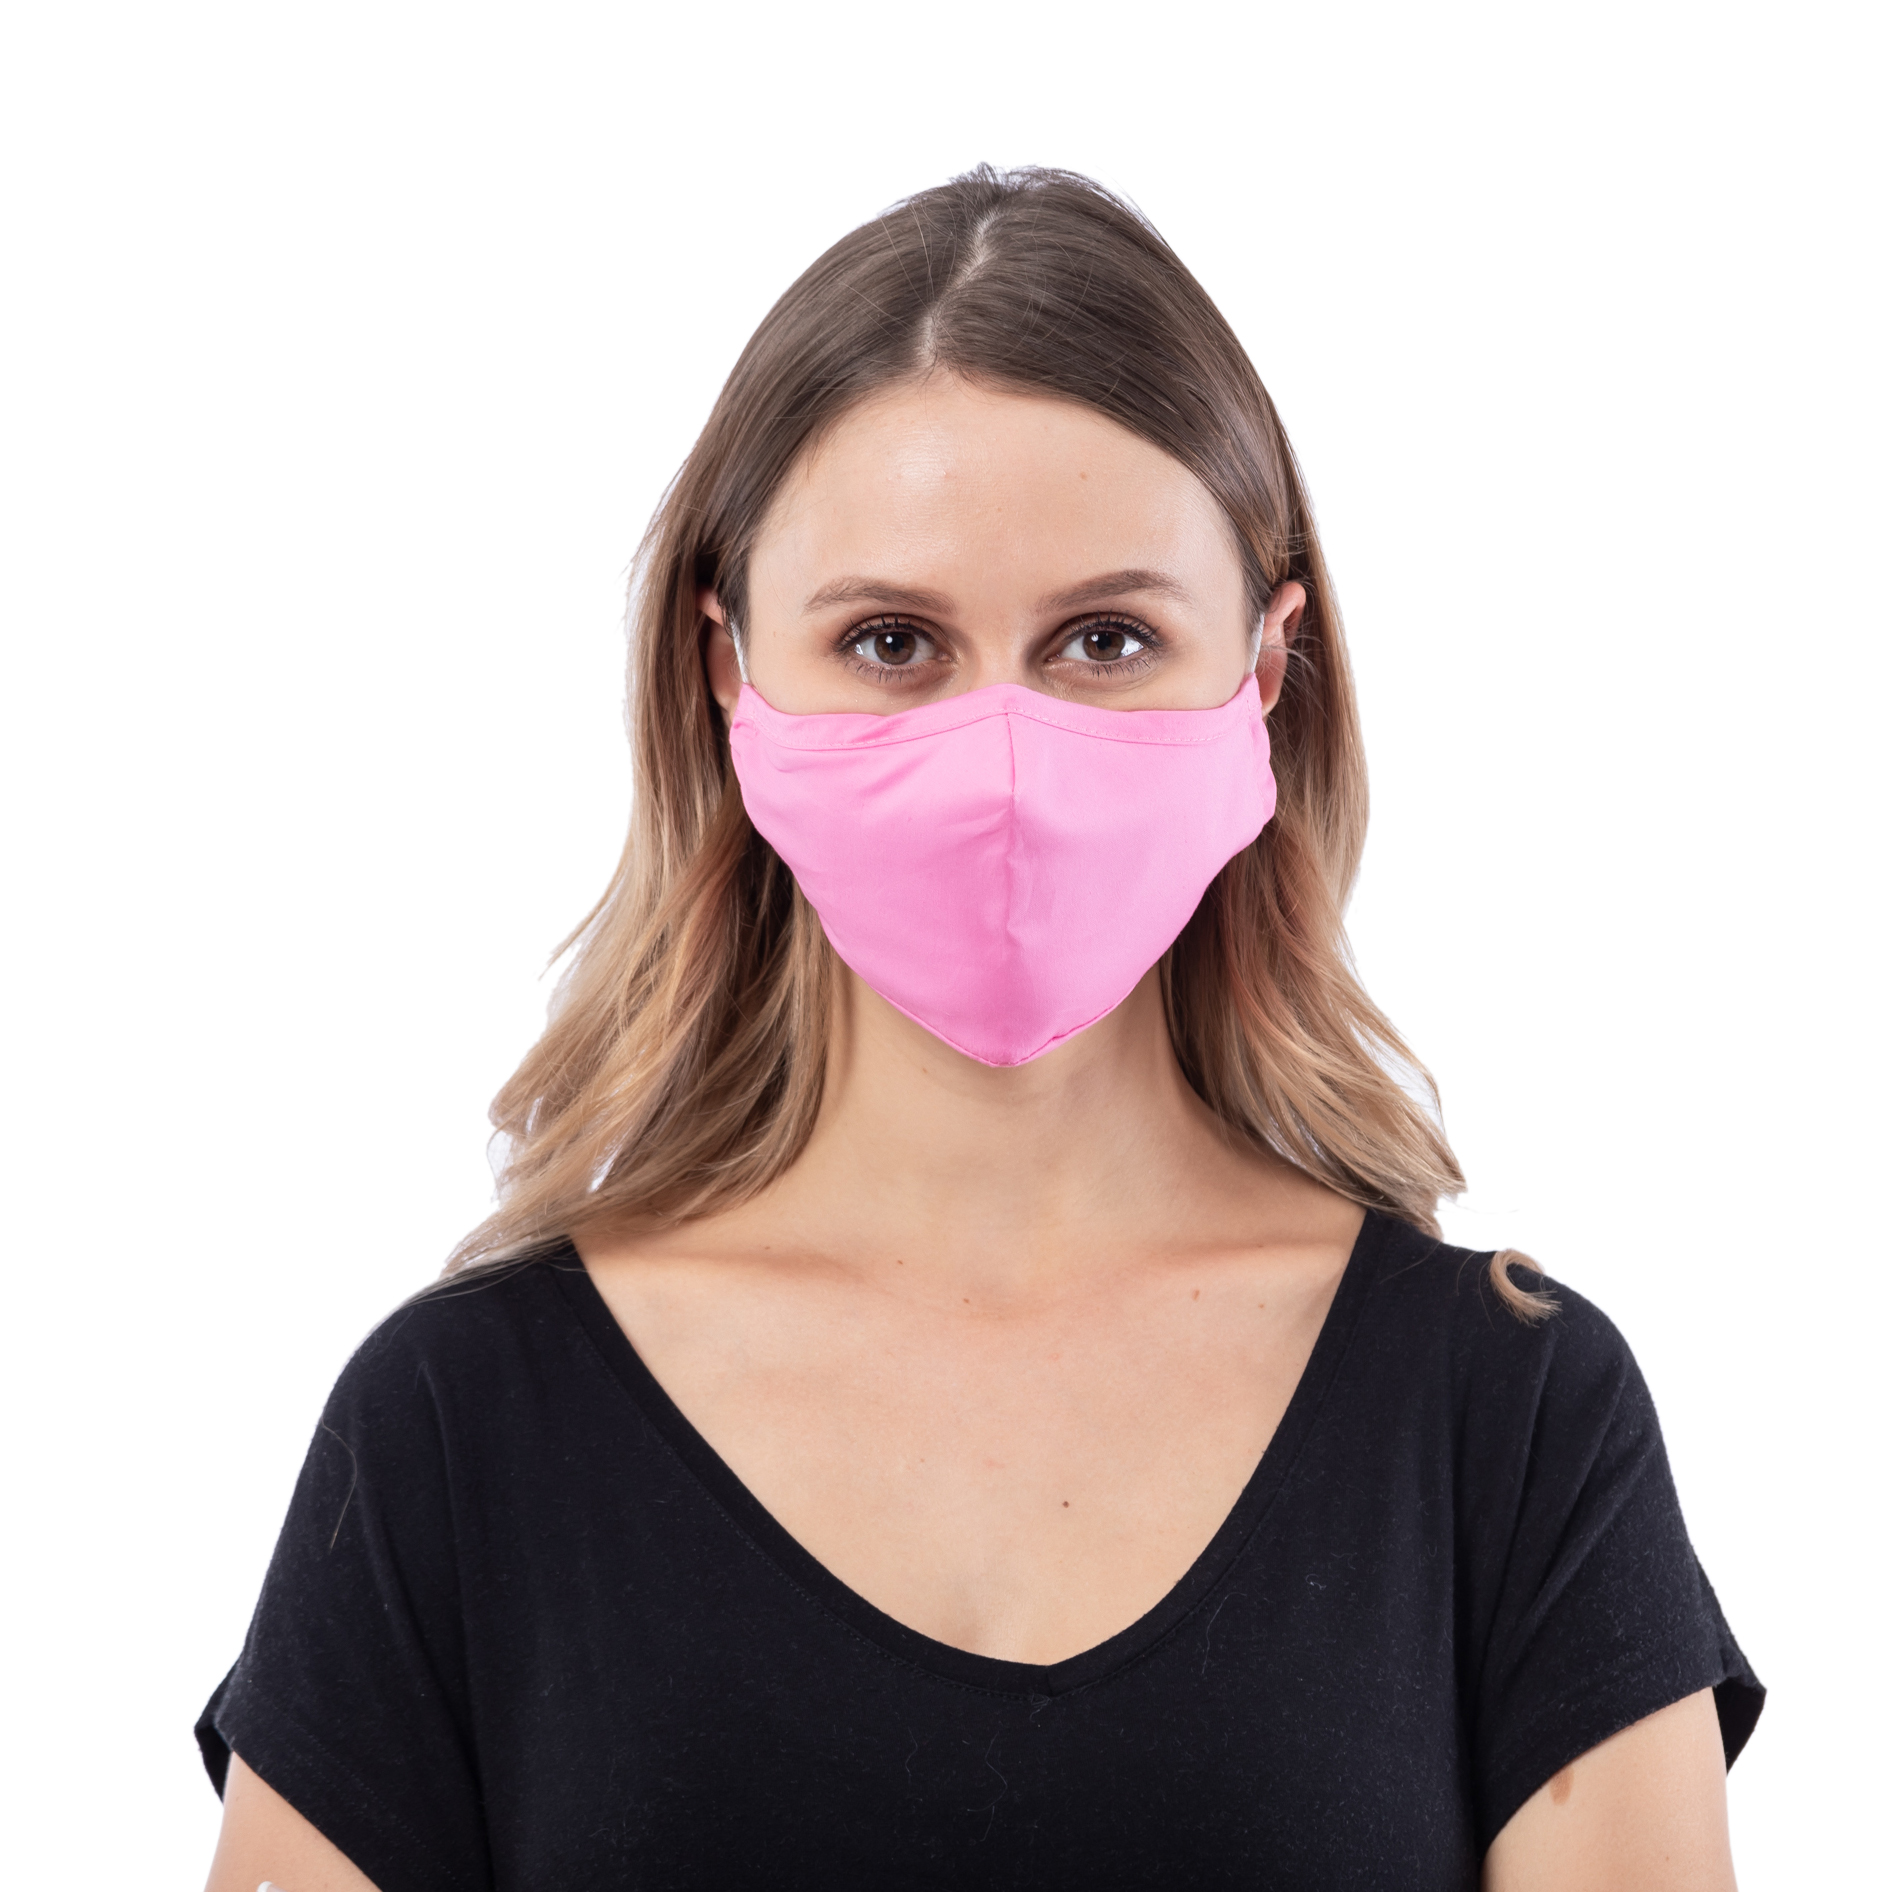 Adult 4-Layer Cotton Mask - Includes 1 Replaceable PM2.5 Filter and Adjustable Ear Straps - PINK